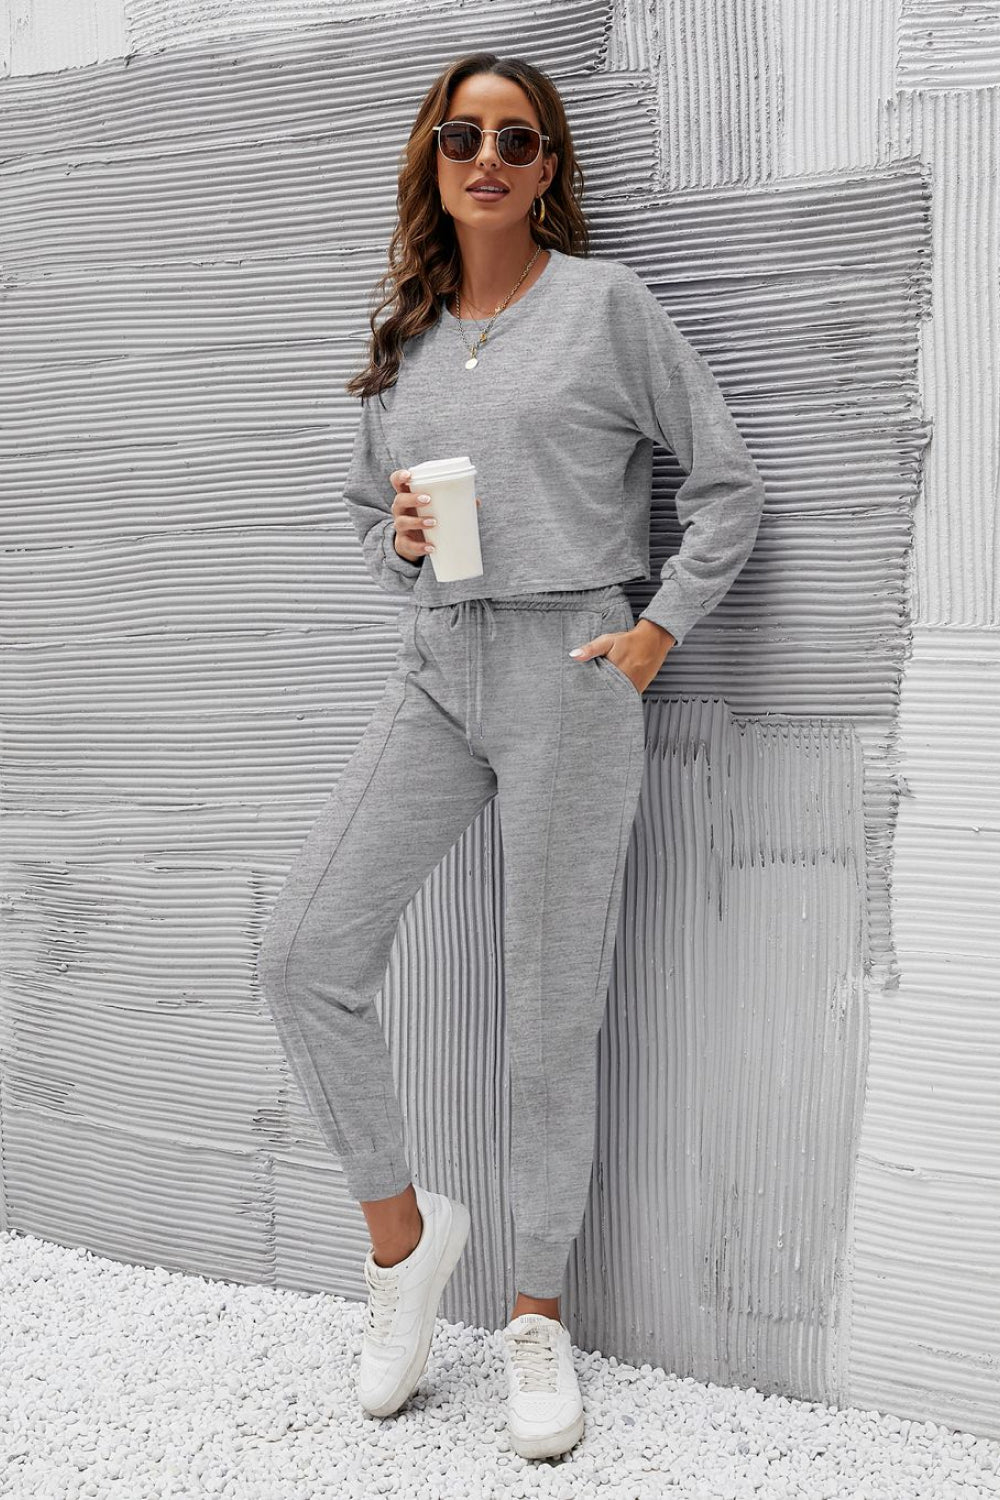 Cropped Top and Sweatpants Set